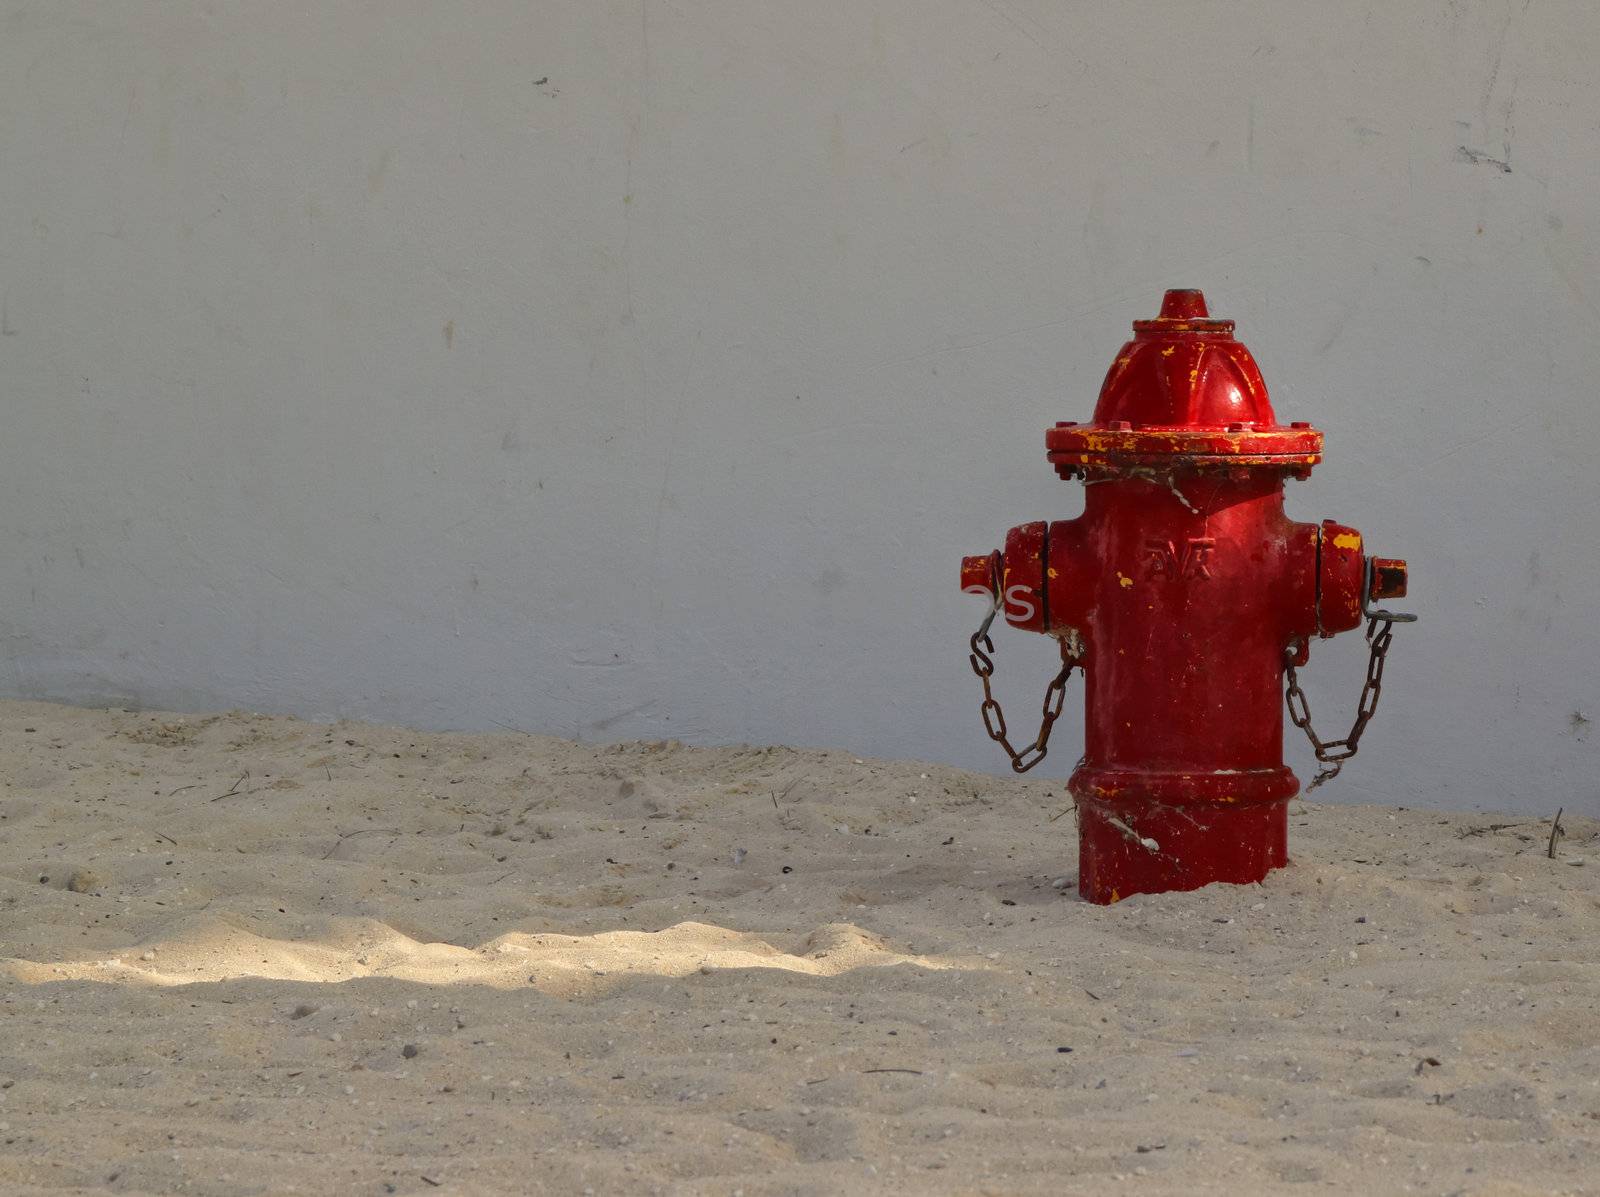 Right side view of red fire hydrant on a sandy beach